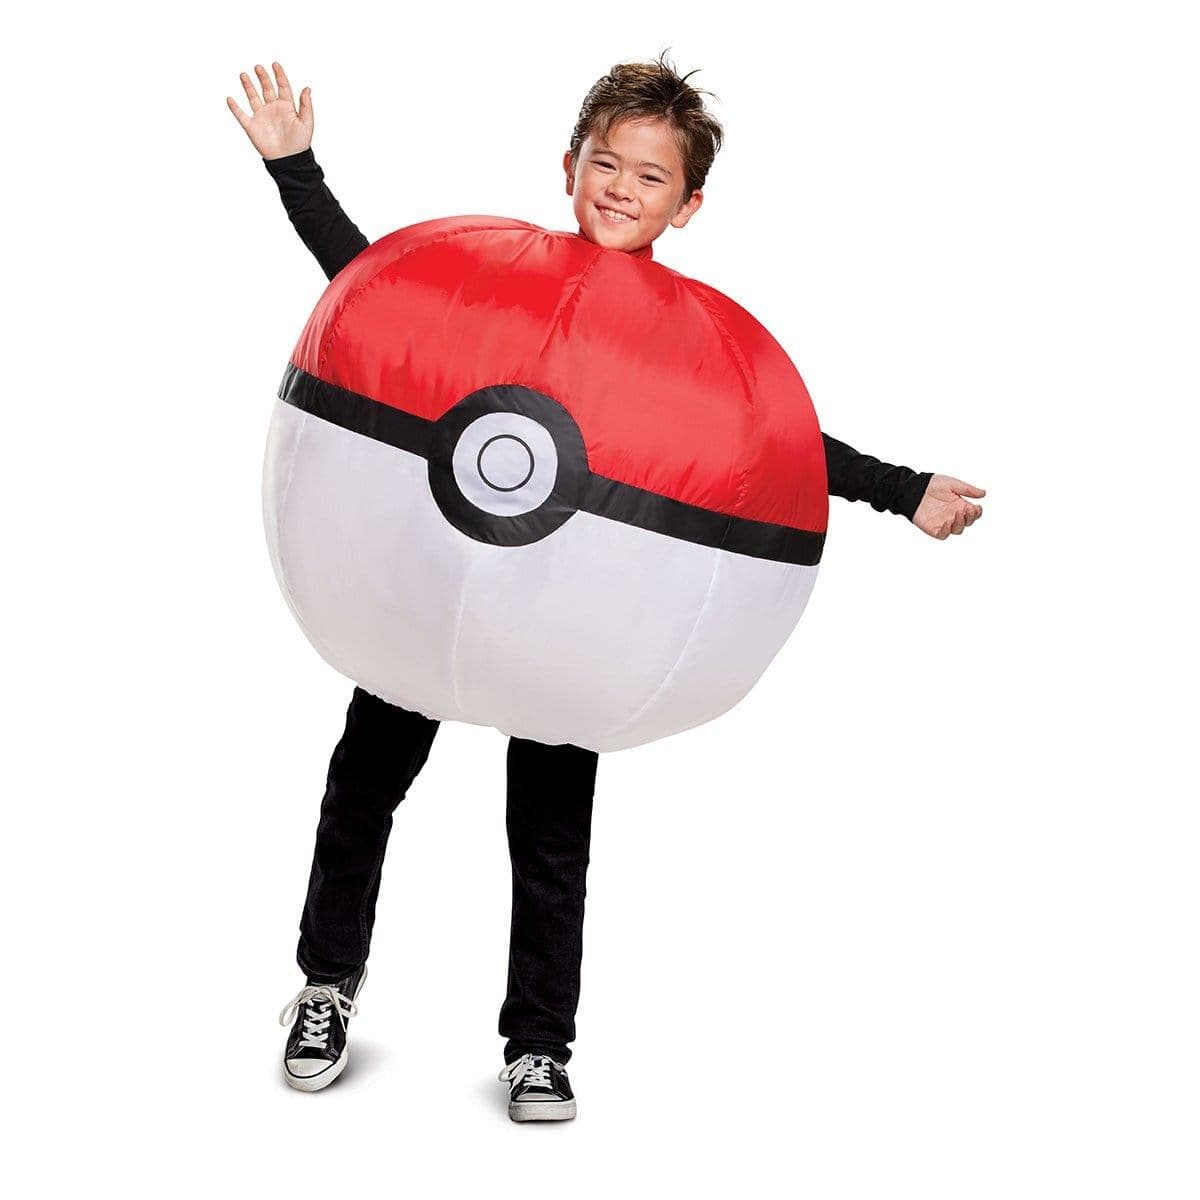 Buy Costumes Pokéball Inflatable Costume for Kids, Pokémon sold at Party Expert